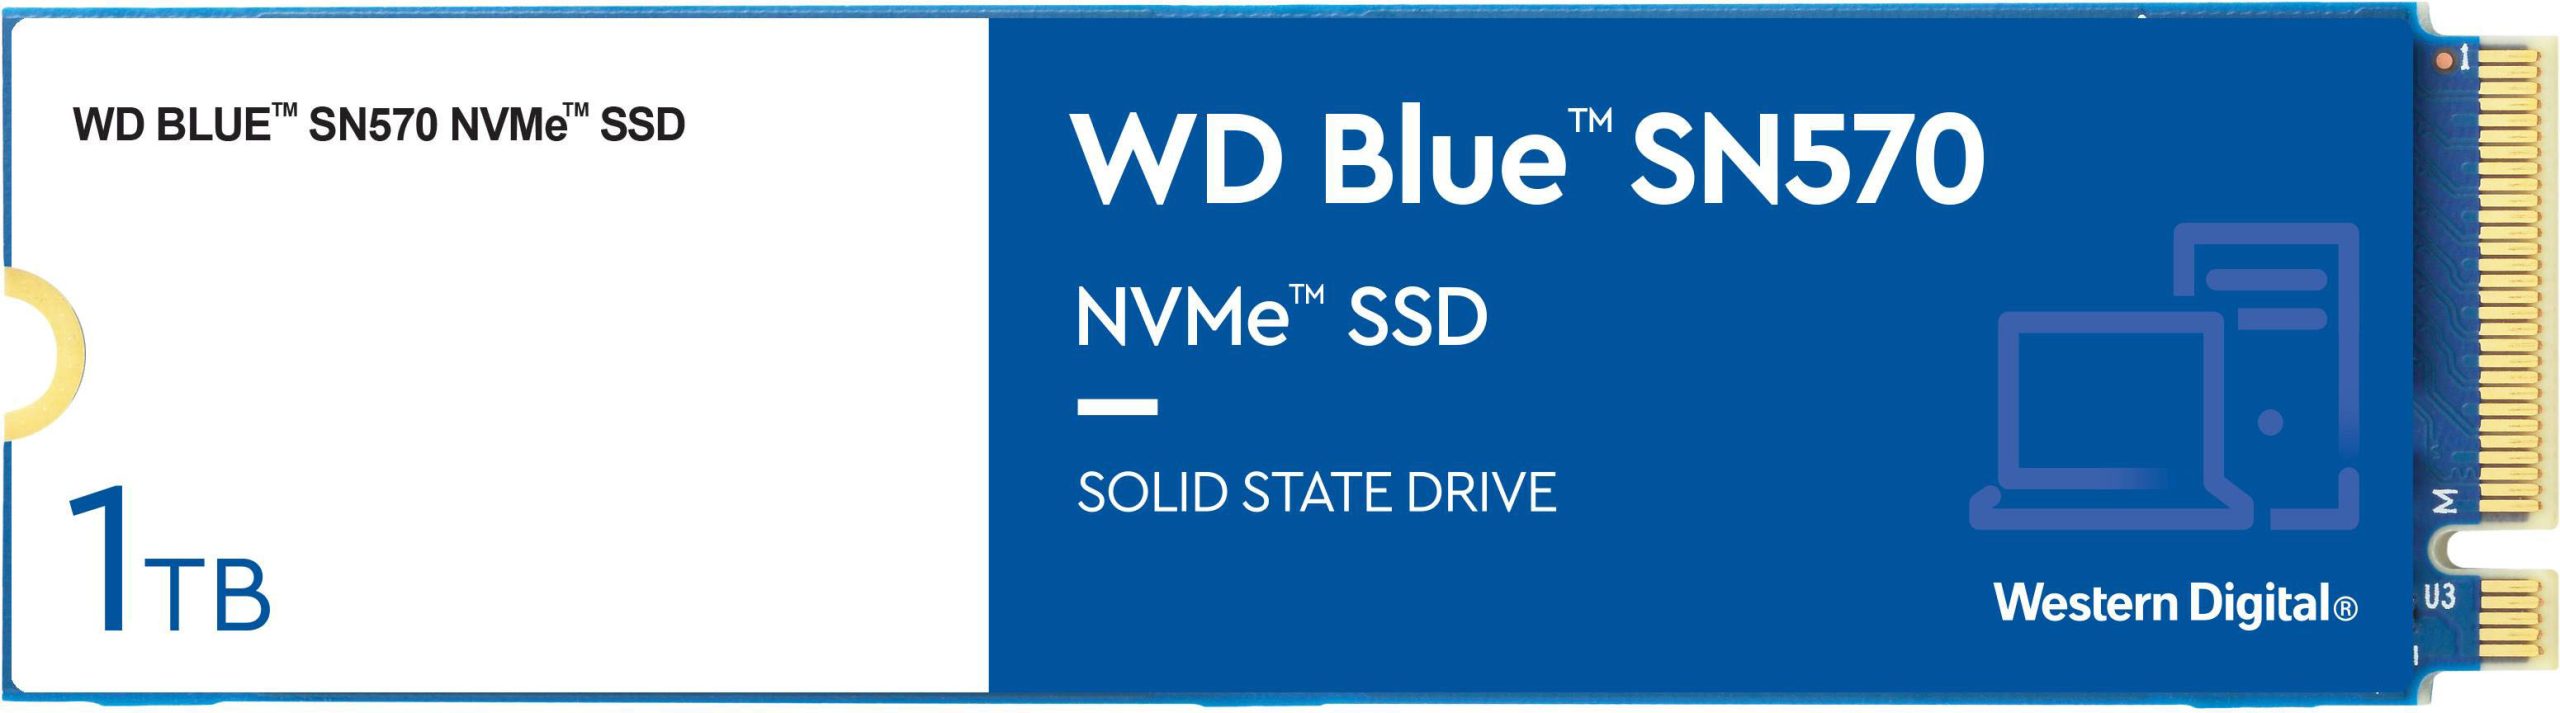 WD – Blue SN570 1TB Internal PCIe Gen3 x4 Solid State Drive for Laptops & Desktops – Just $59.99 at Best Buy